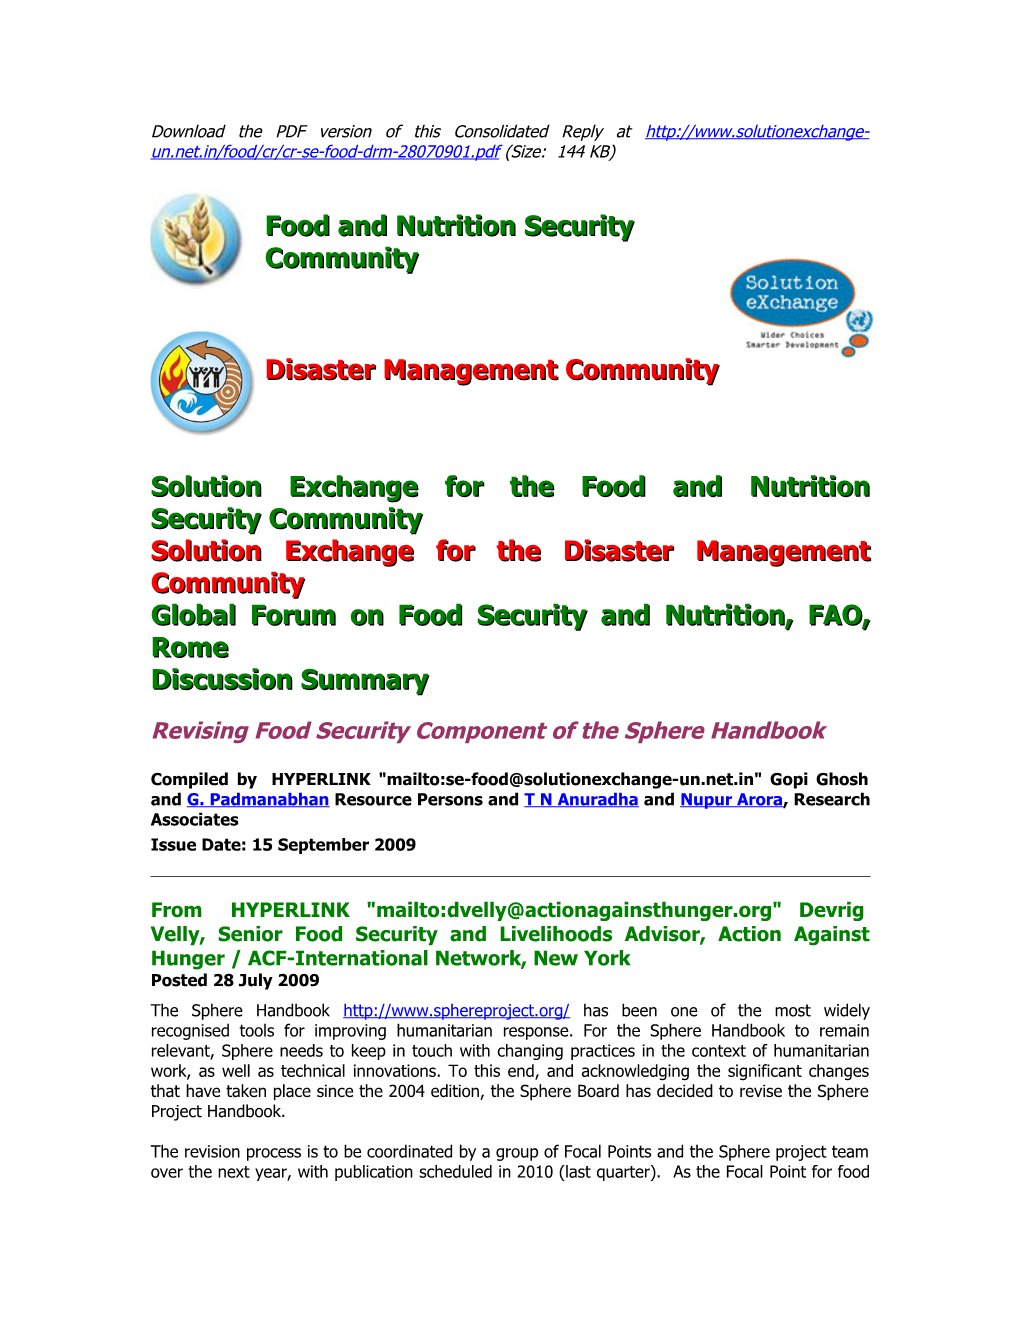 Solution Exchange for the Food and Nutrition Security Community